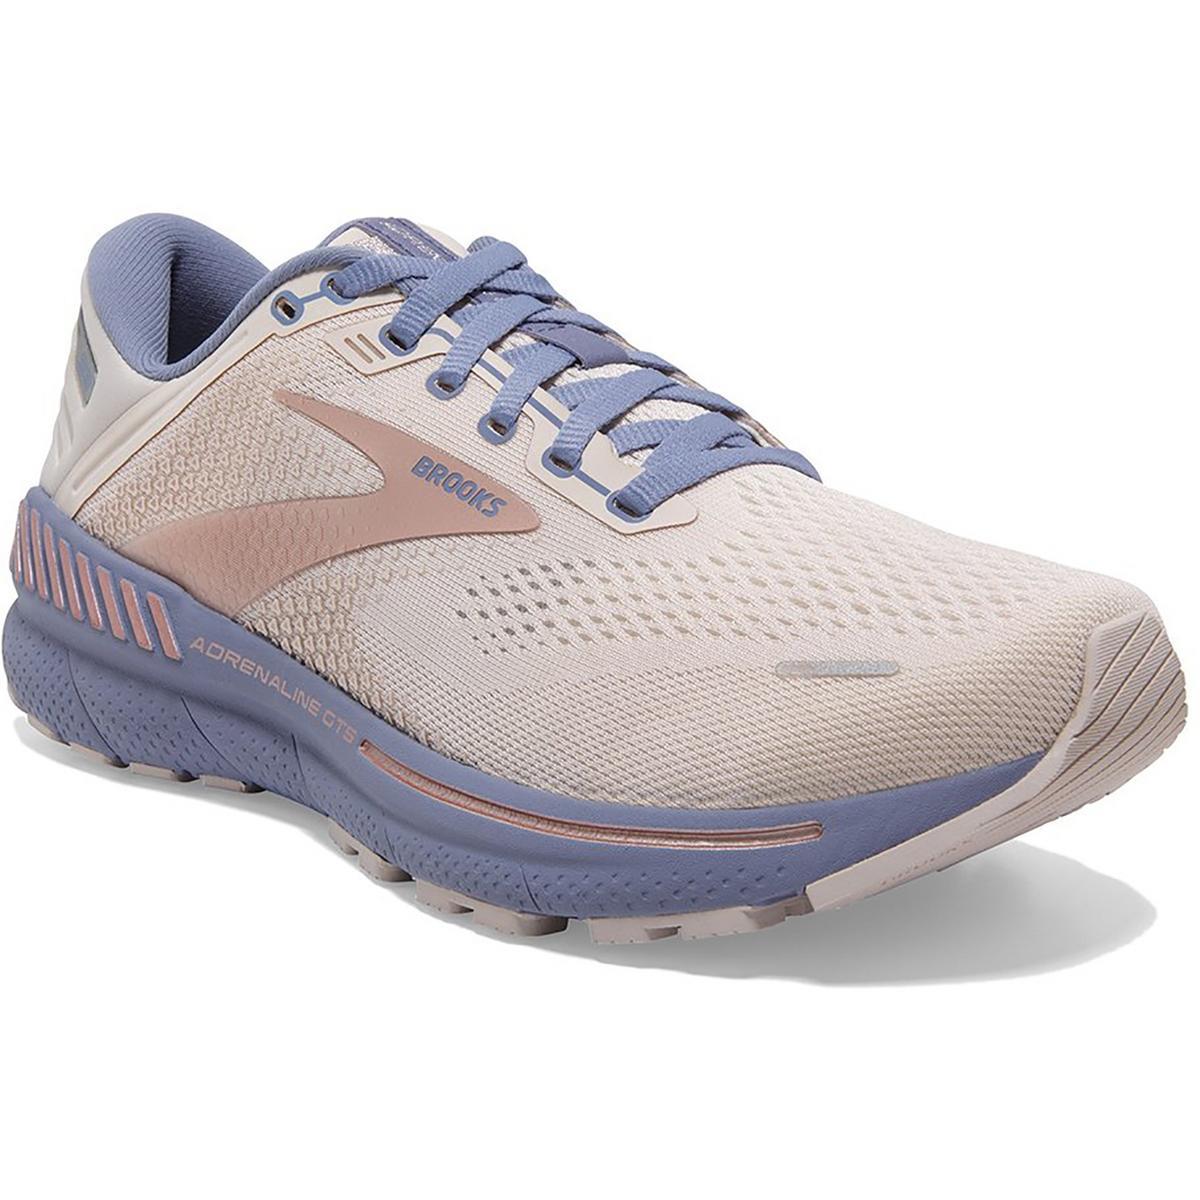 Brooks Womens Adrenaline Gts 22 Athletic and Training Shoes Sneakers Bhfo 7537 Lilac/Tempest/Pink